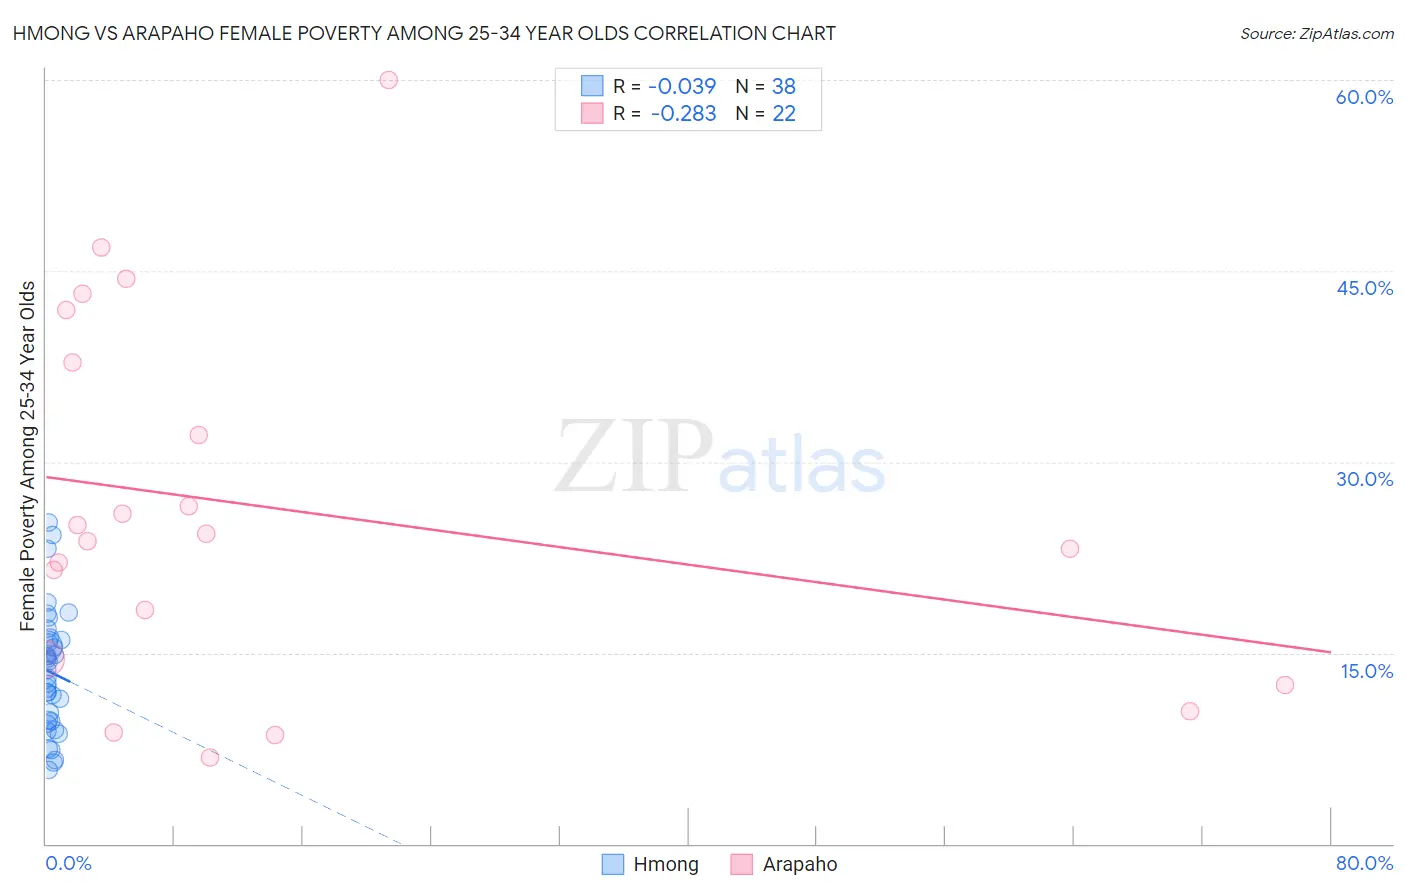 Hmong vs Arapaho Female Poverty Among 25-34 Year Olds